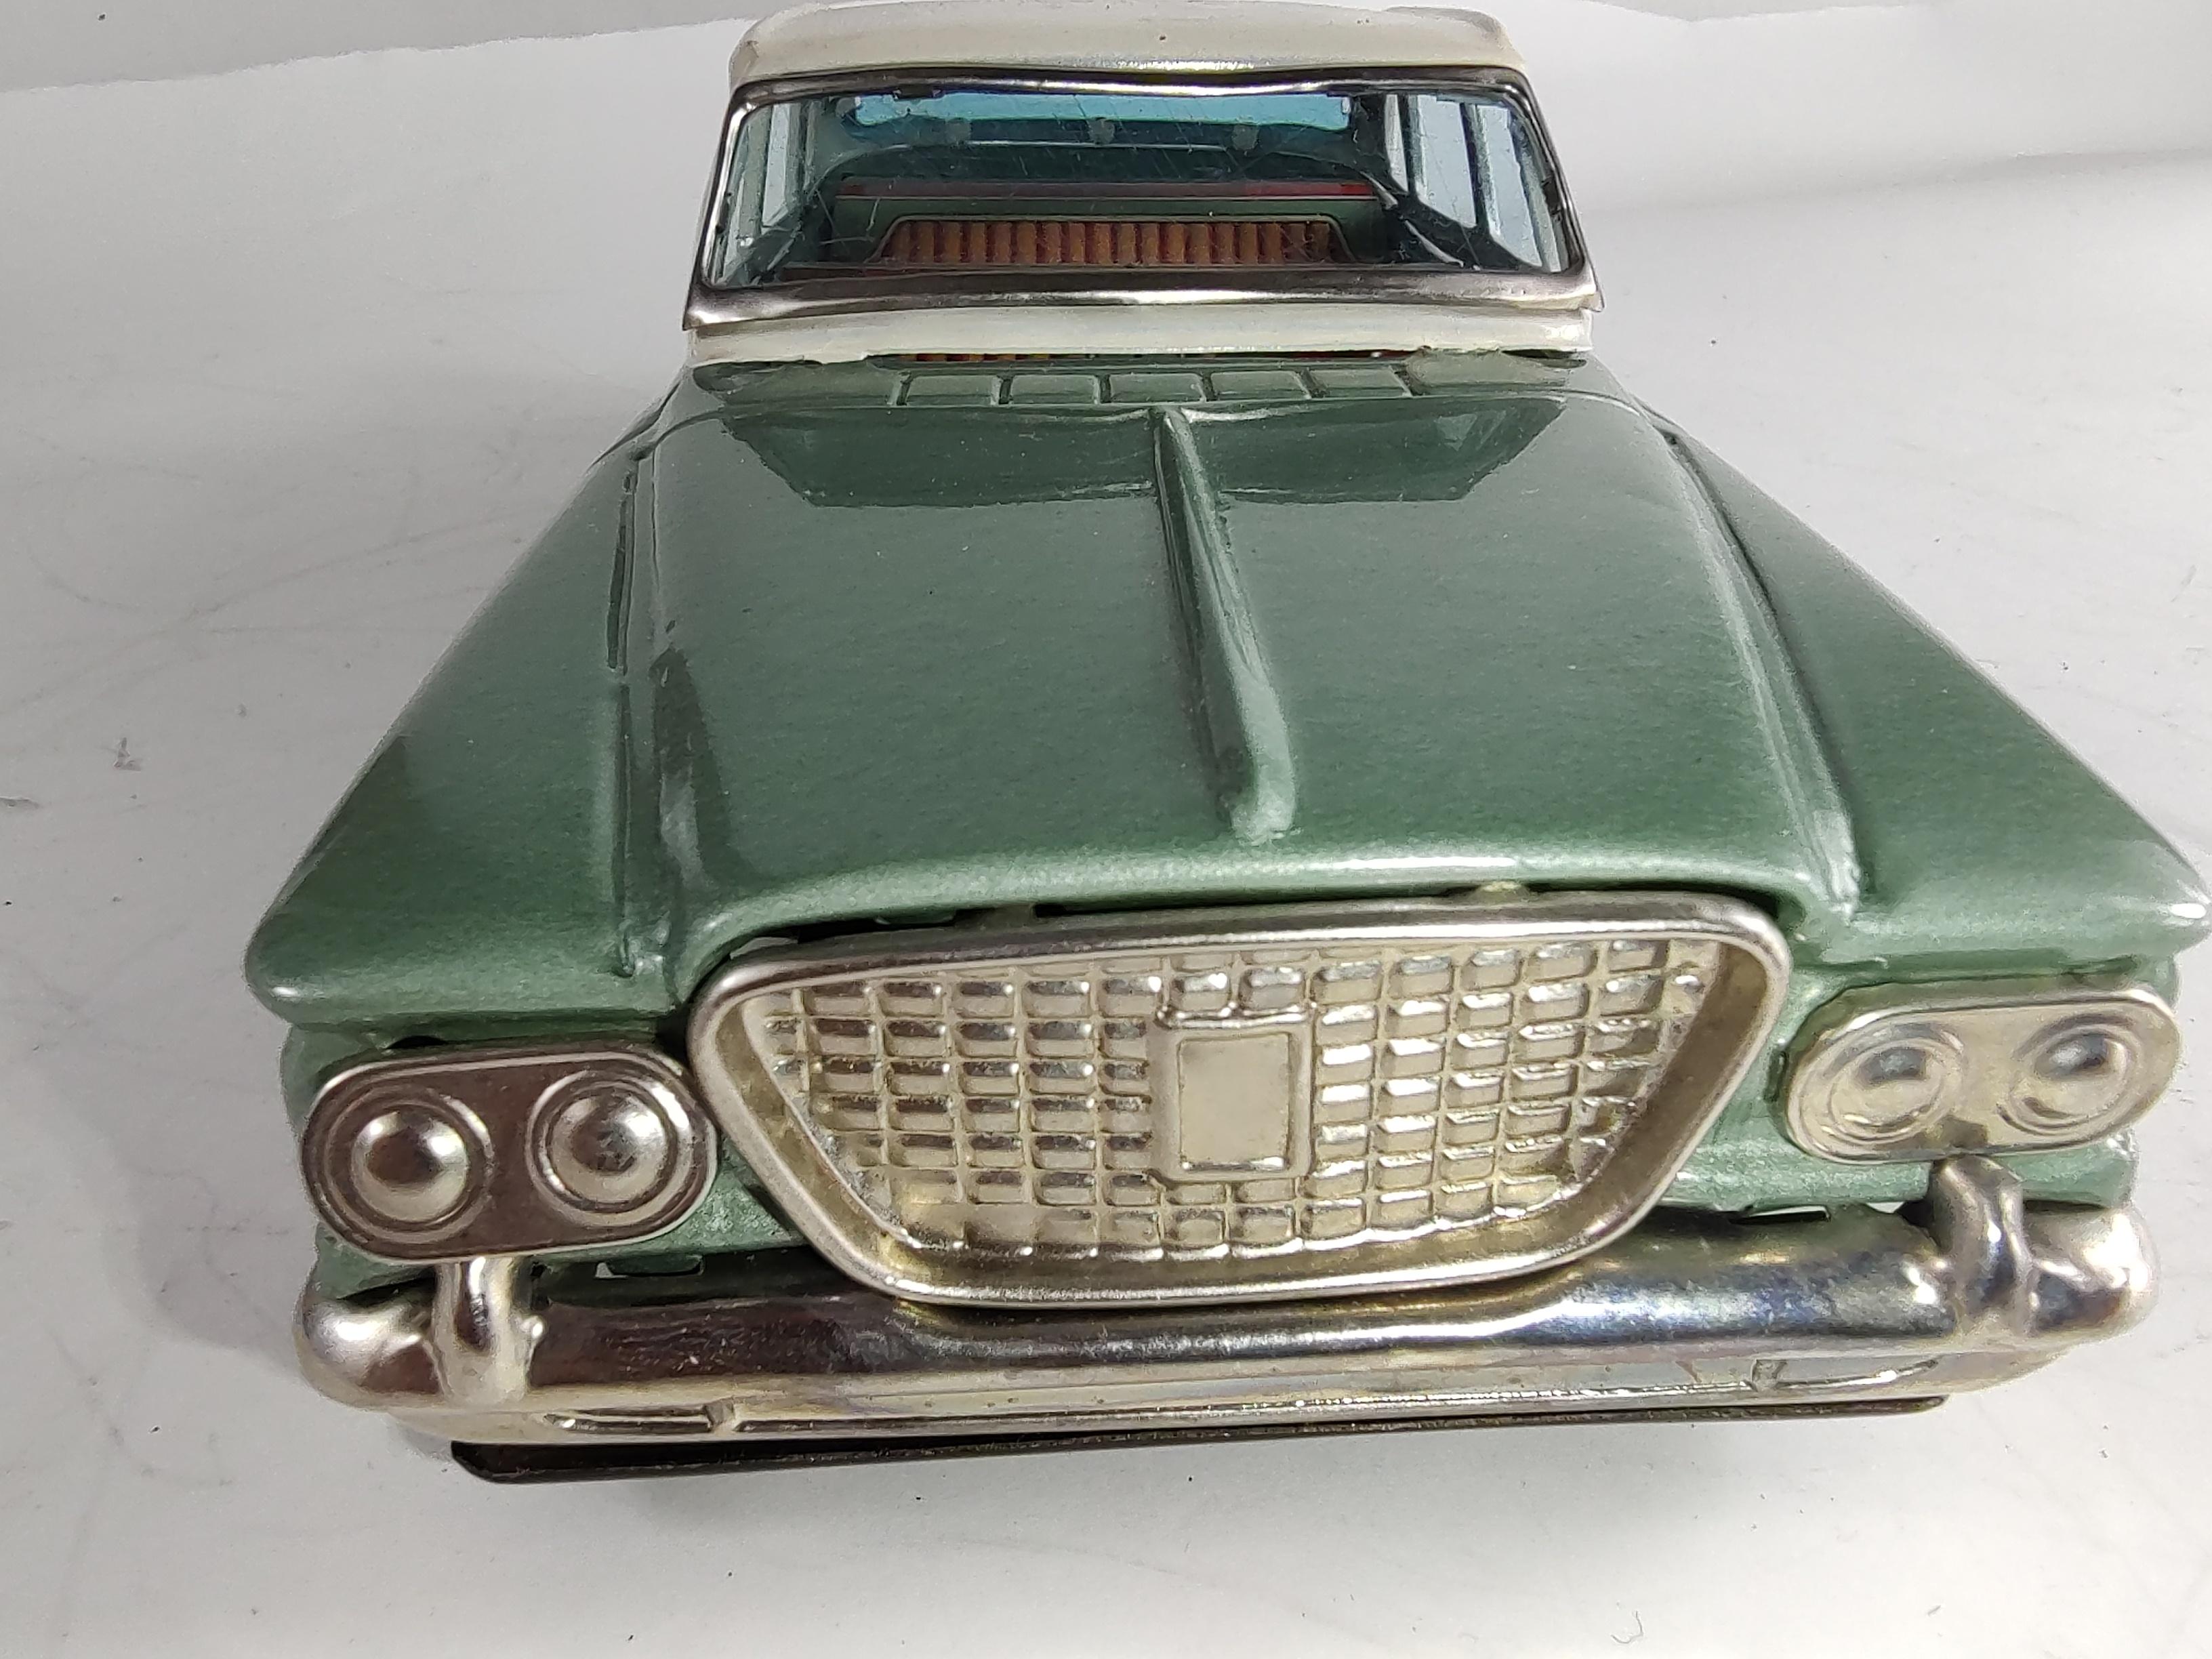 Hand-Crafted Midcentury Japanese Tin Litho Toy Plymouth Valiant, circa 1962 For Sale